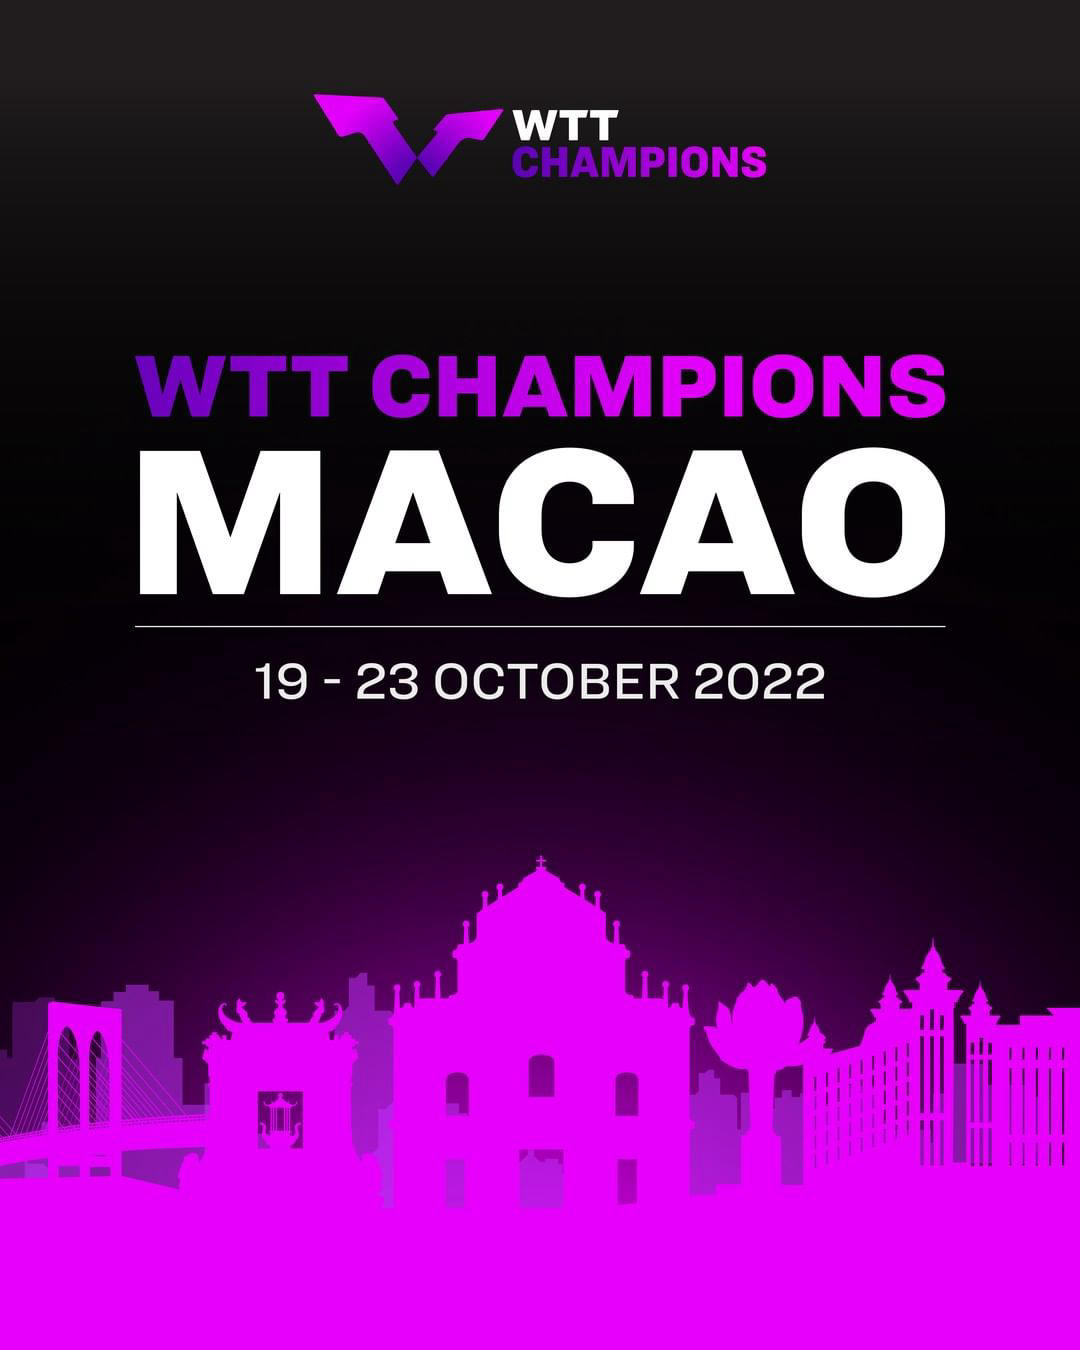 World Table Tennis - Get ready for an action packed October in China 🇨🇳 with #WTTMacao and #WTTXin